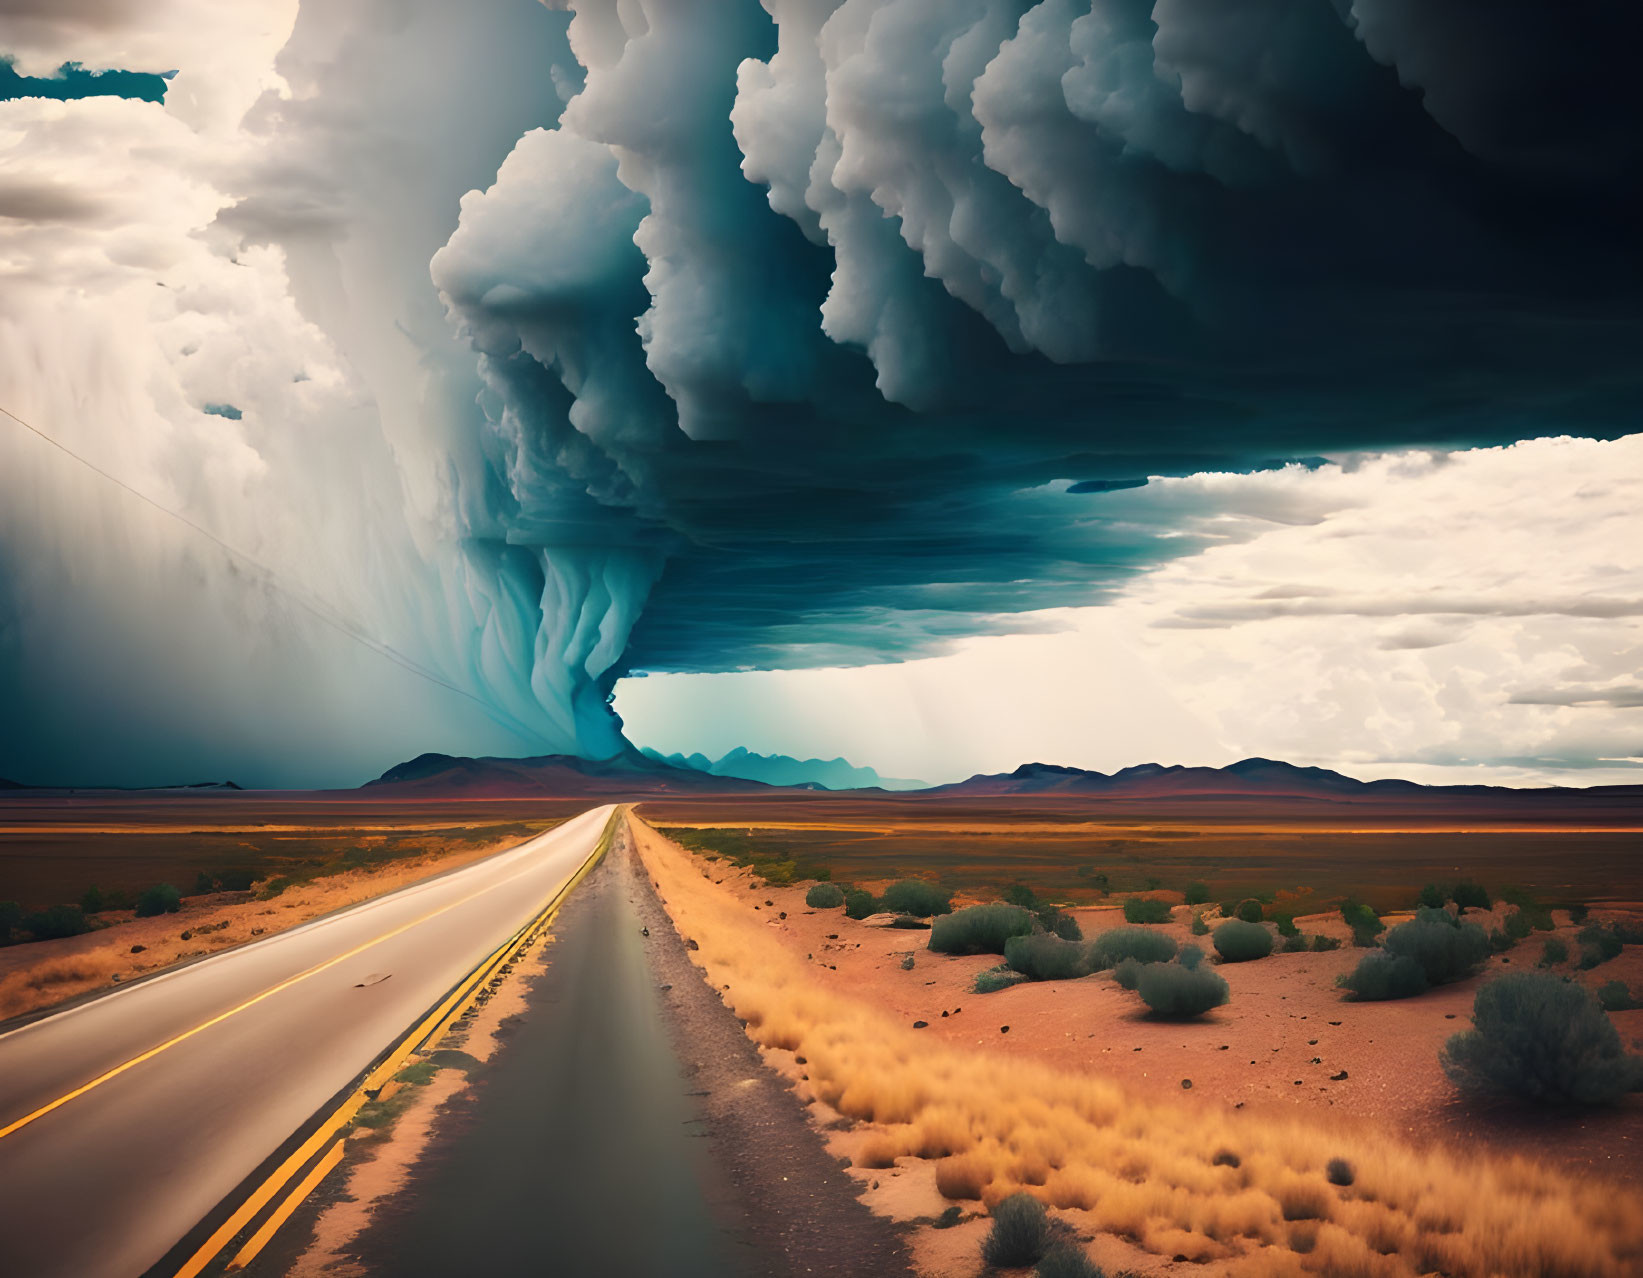 Straight Road in Desert Landscape with Storm Clouds and Rainfall